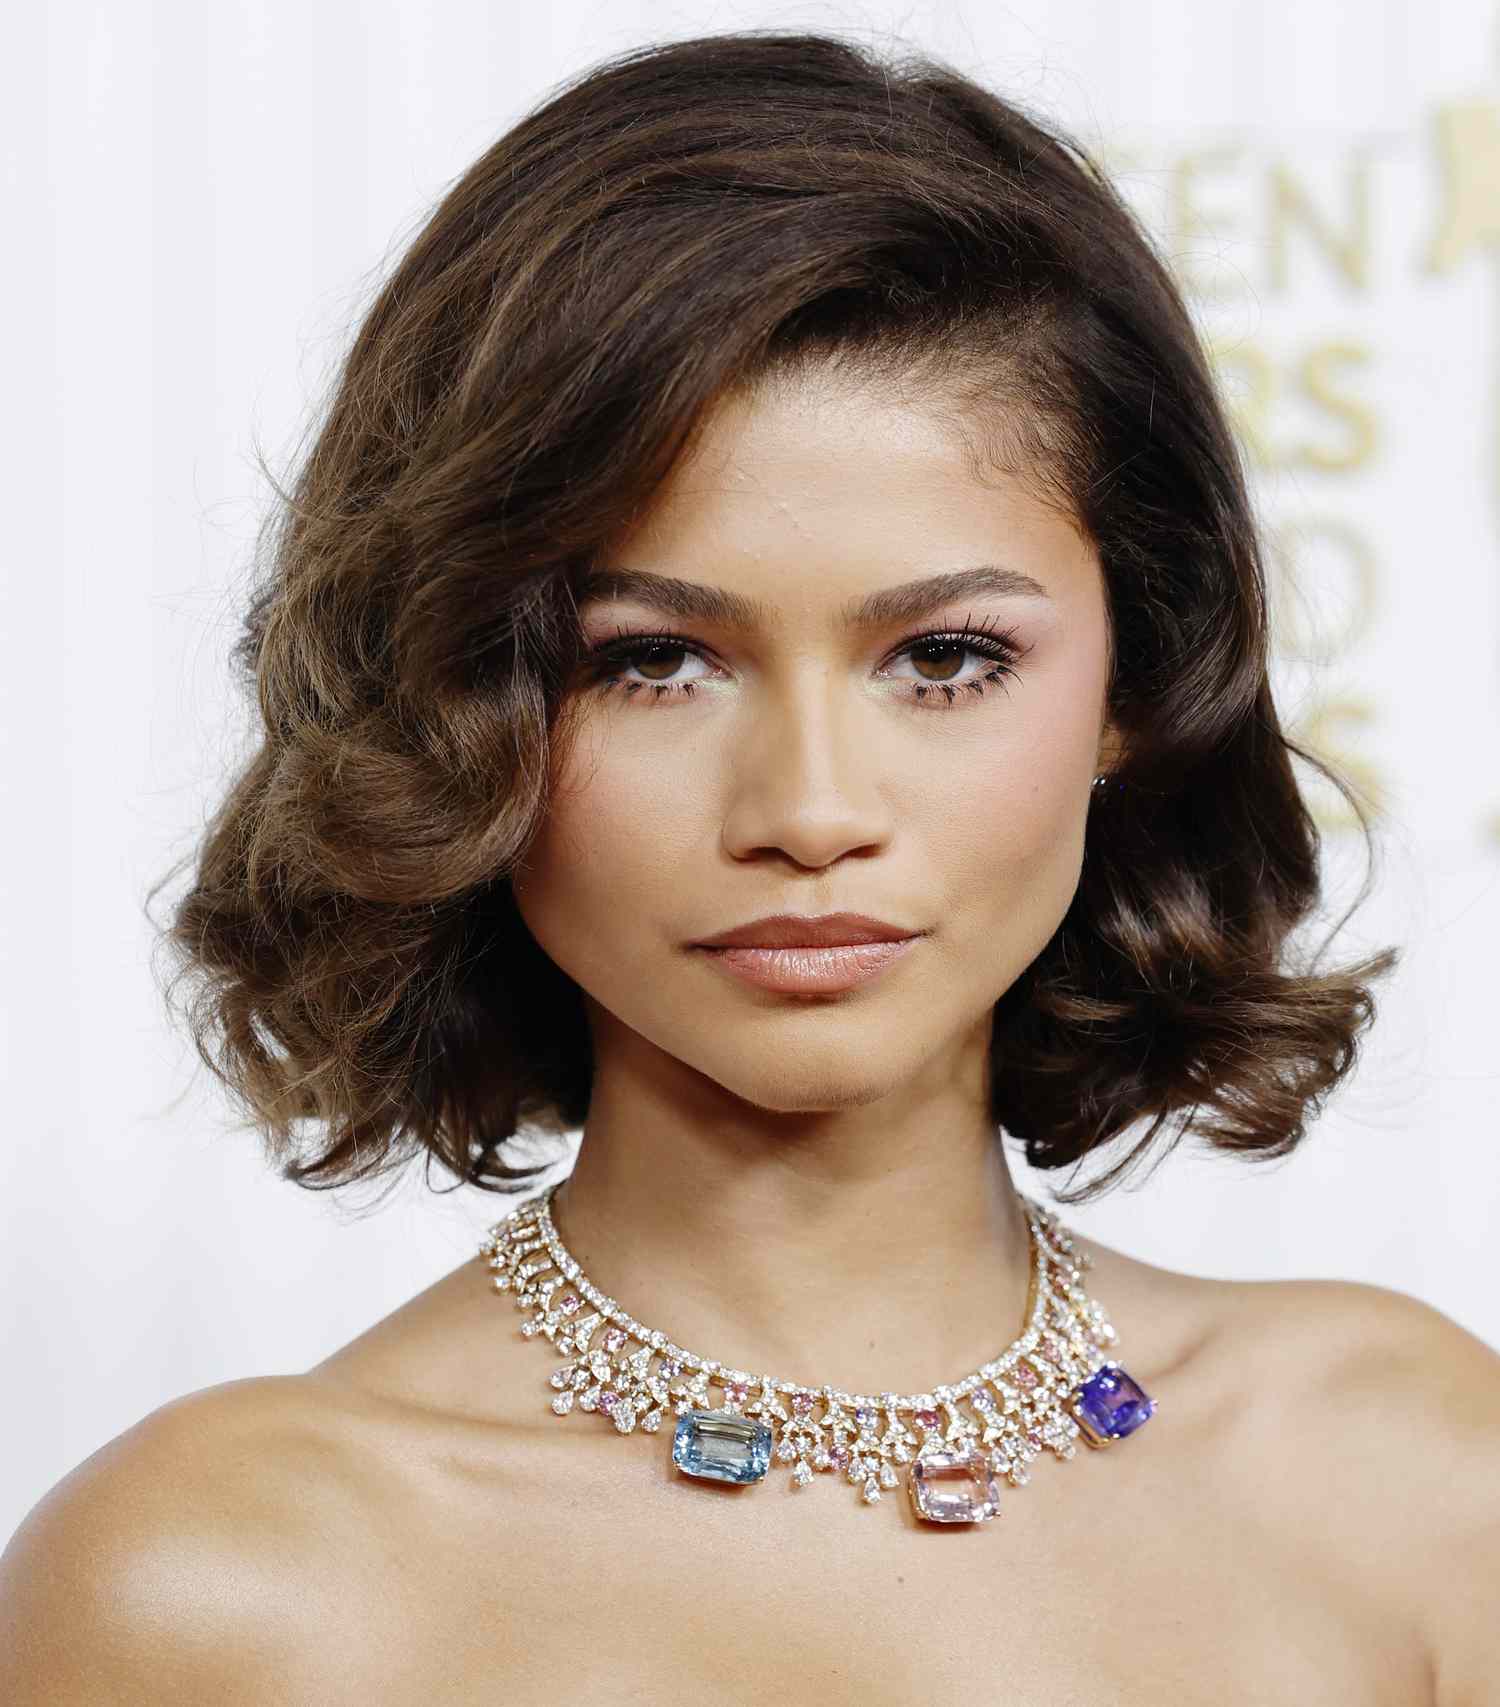 Zendaya attends the 29th Annual Screen Actors Guild Awards 